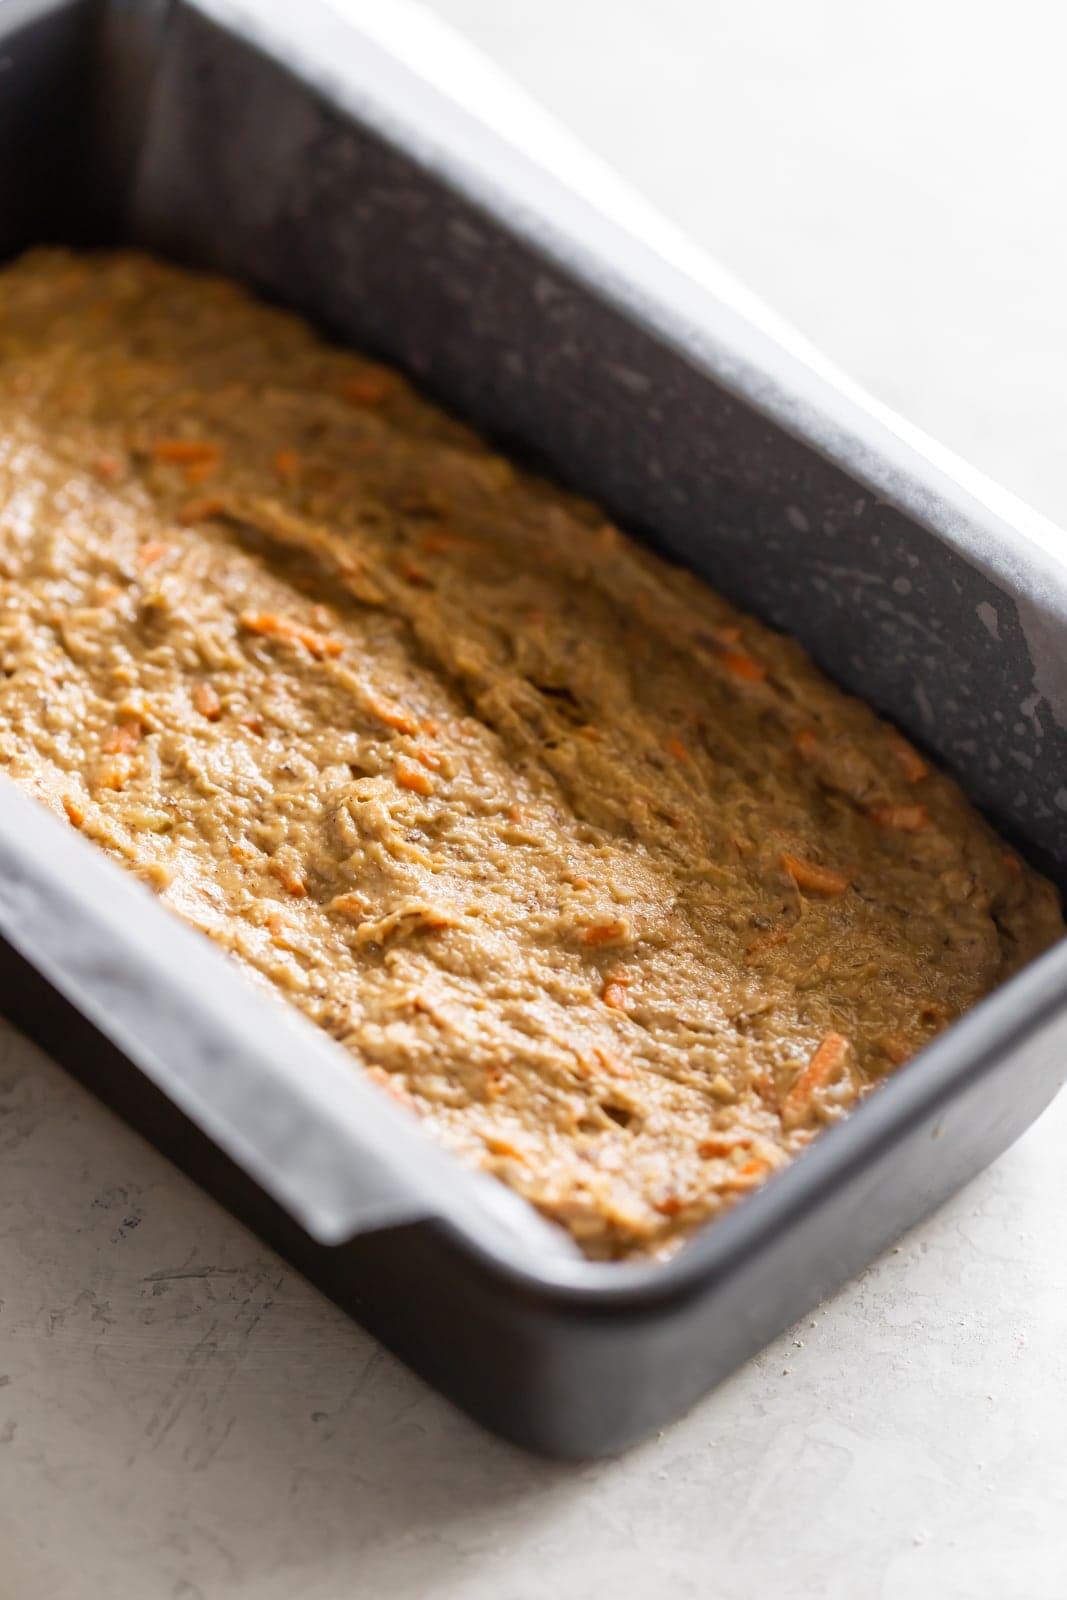 Dairy-free, refined sugar-free, moist carrot cake banana bread made with wholesome ingredients and a crunchy walnut crumble topping!